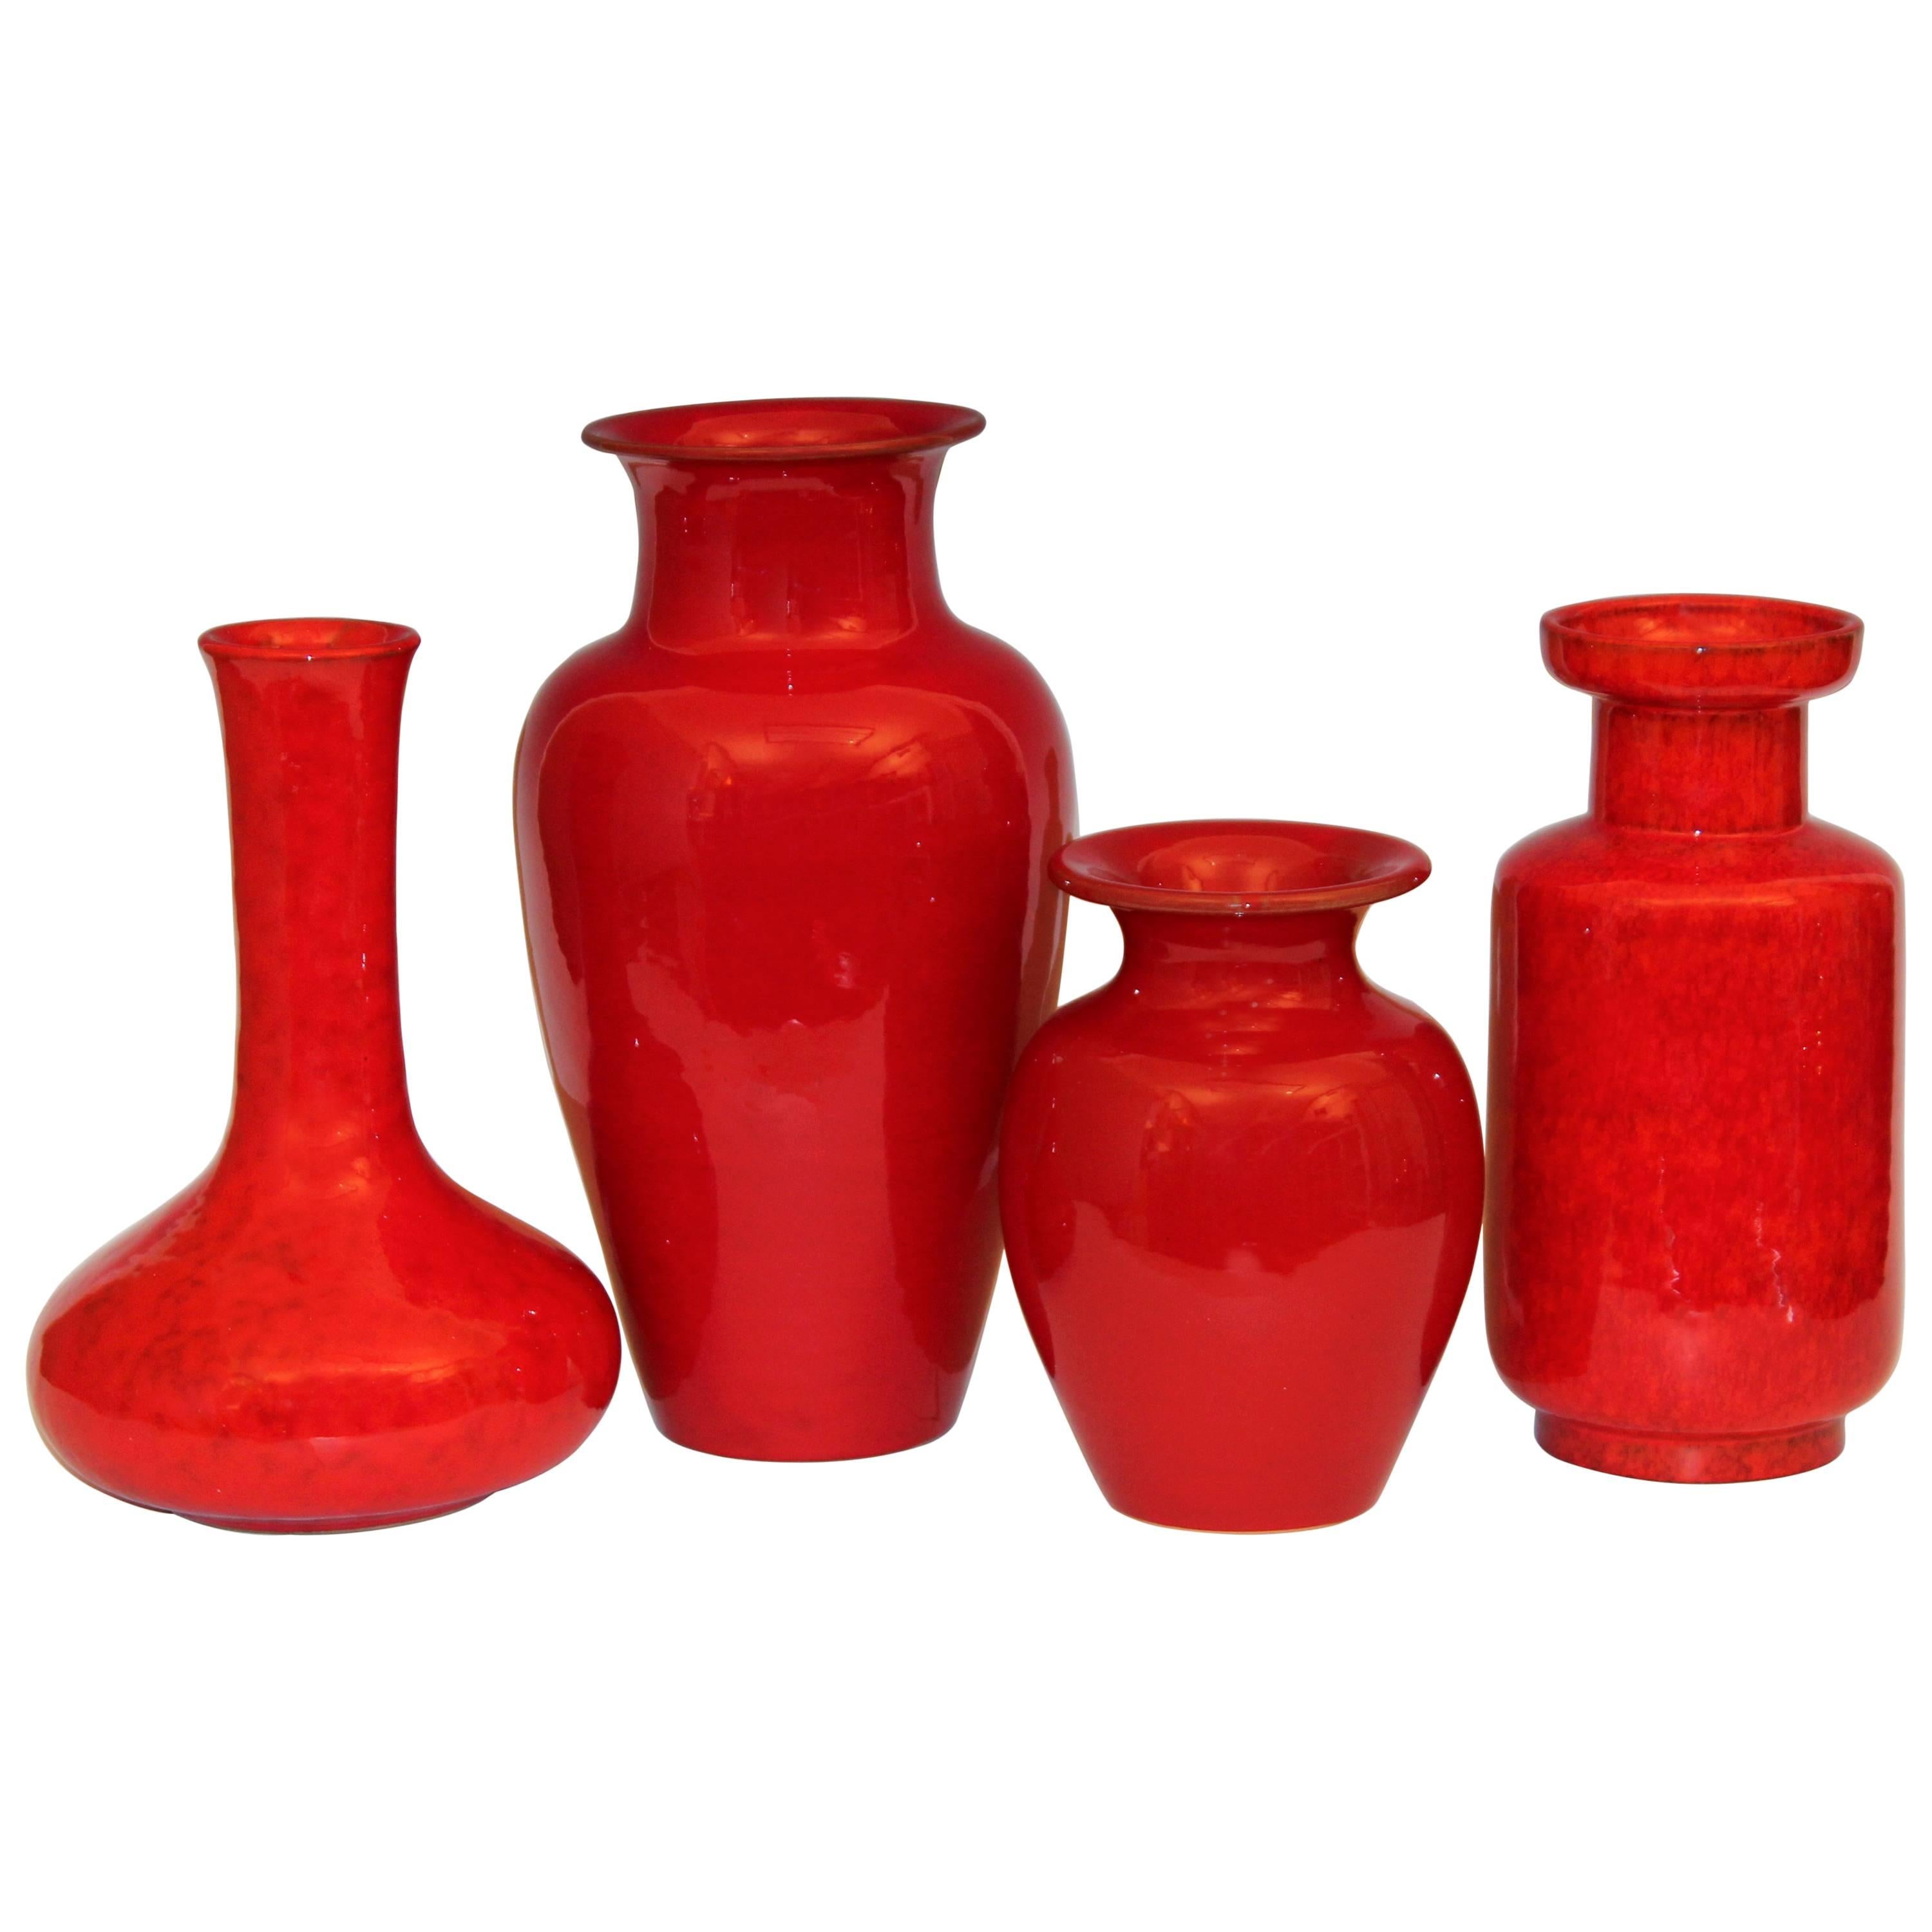 Collection Vintage Italian Pottery Vases in Atomic Red Glaze